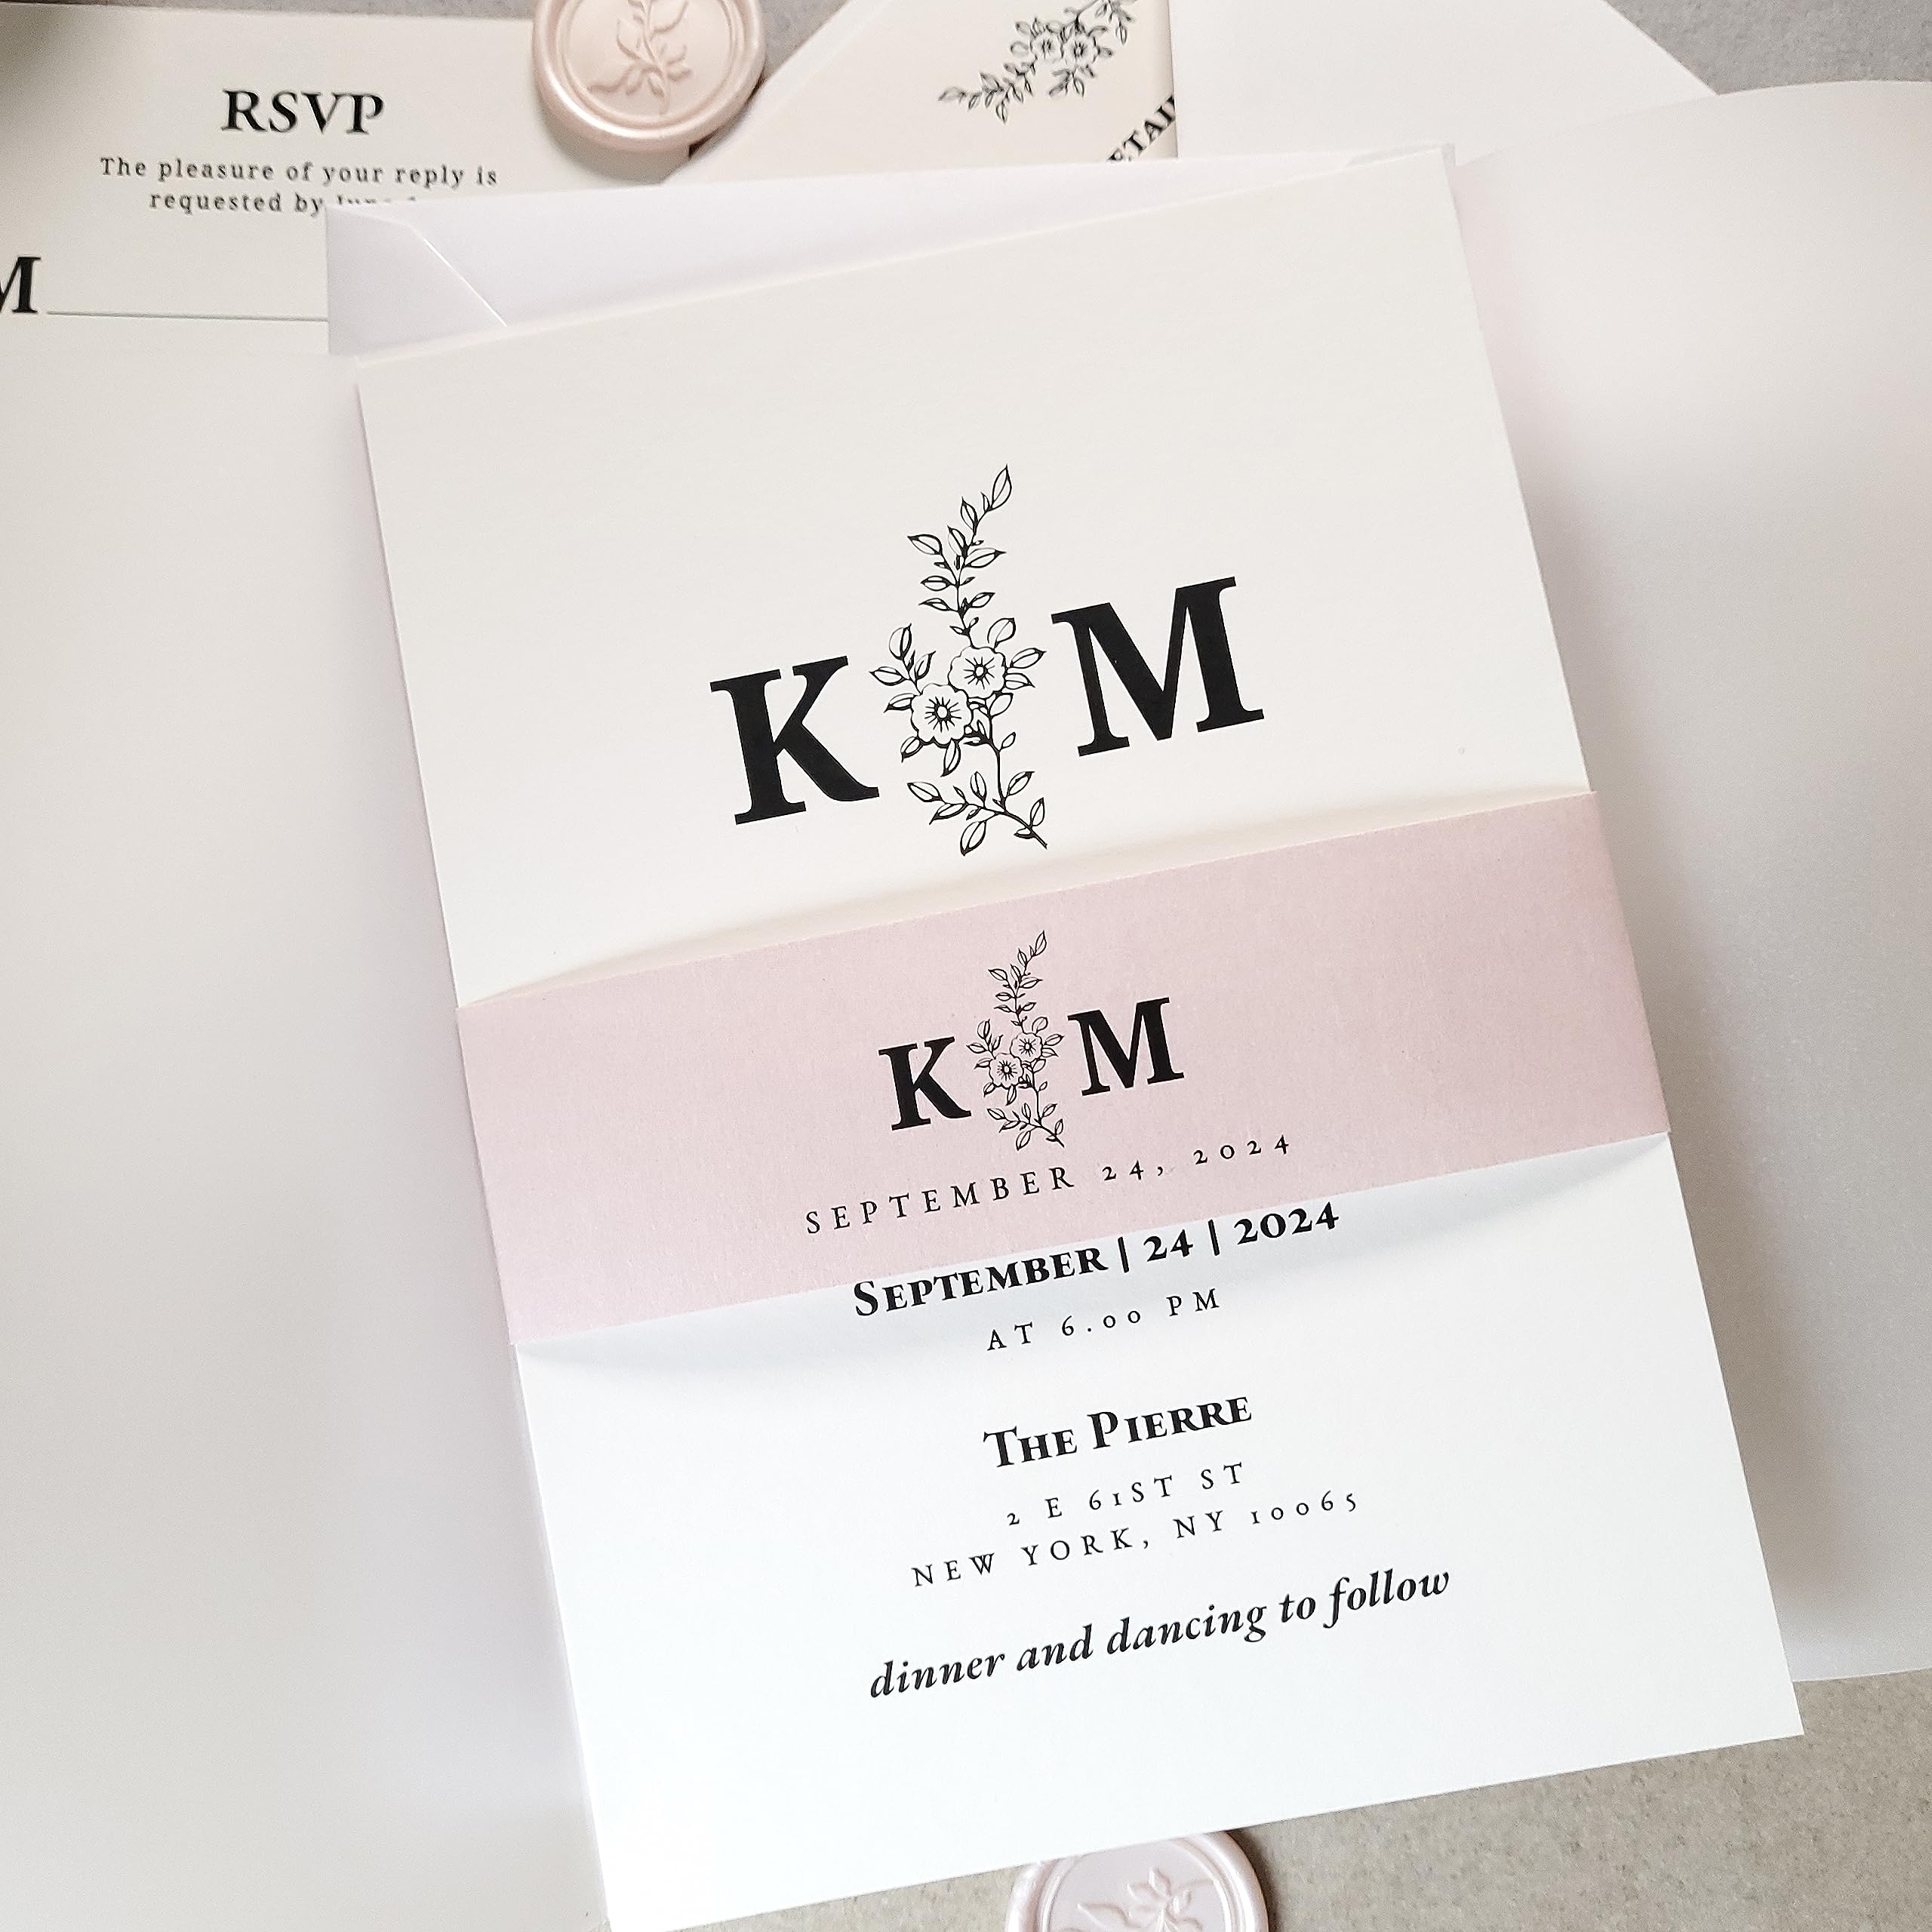 Set of 10 Modern 4x6 Wedding Invitations with RSVP Cards, Envelopes, Wedding Kit with Invites, Details card, QR Code Card, Belly Band, Response Cards, Vellum Wrap, Wax Seal (4